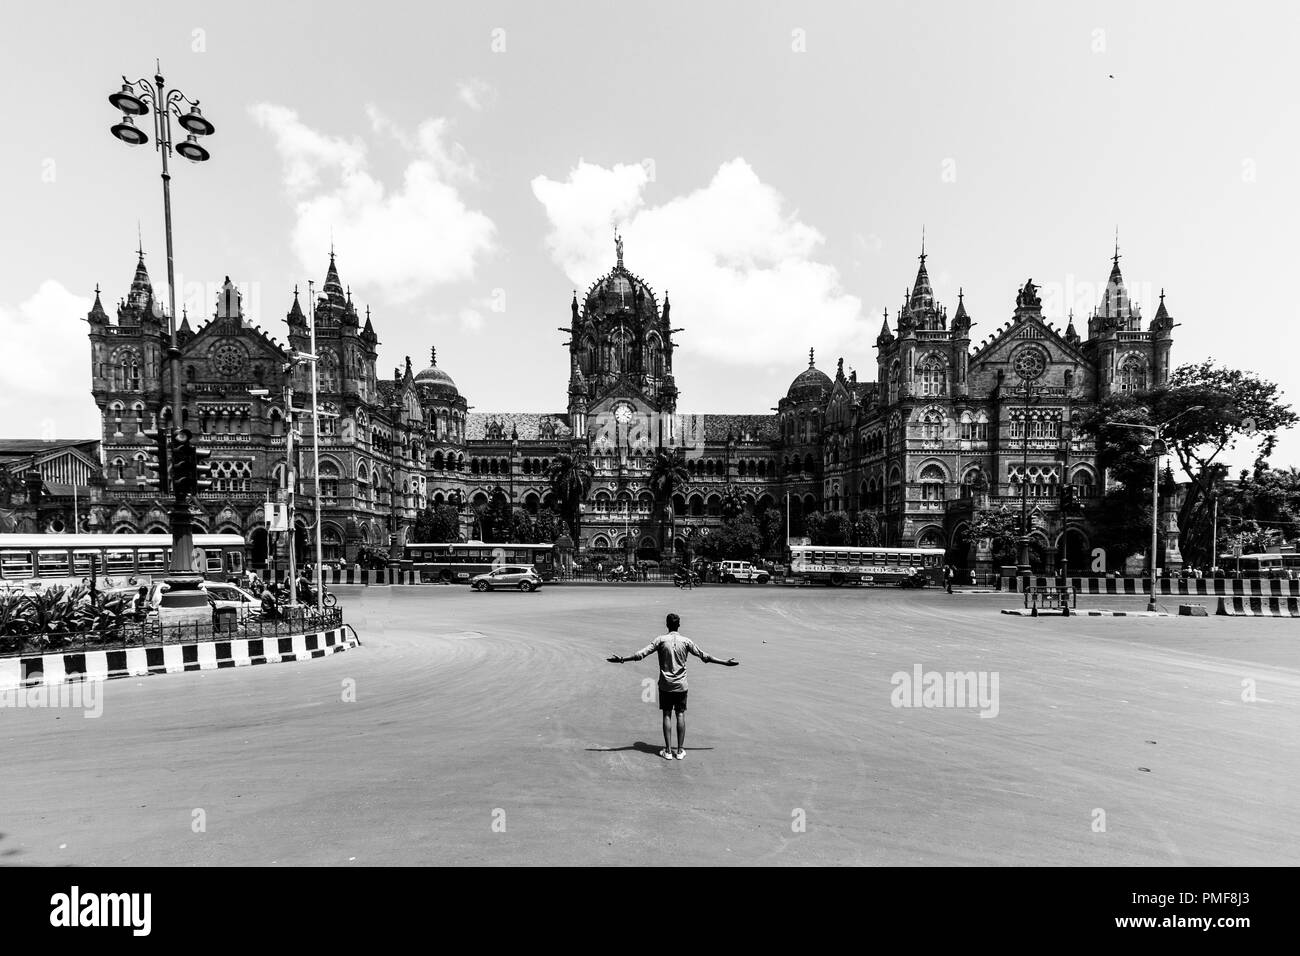 Chhatrapati Shivaji Maharaj Terminus in Mumbai, formerly known as Victoria Terminus is a historic railway station and a UNESCO World Heritage Site. Stock Photo